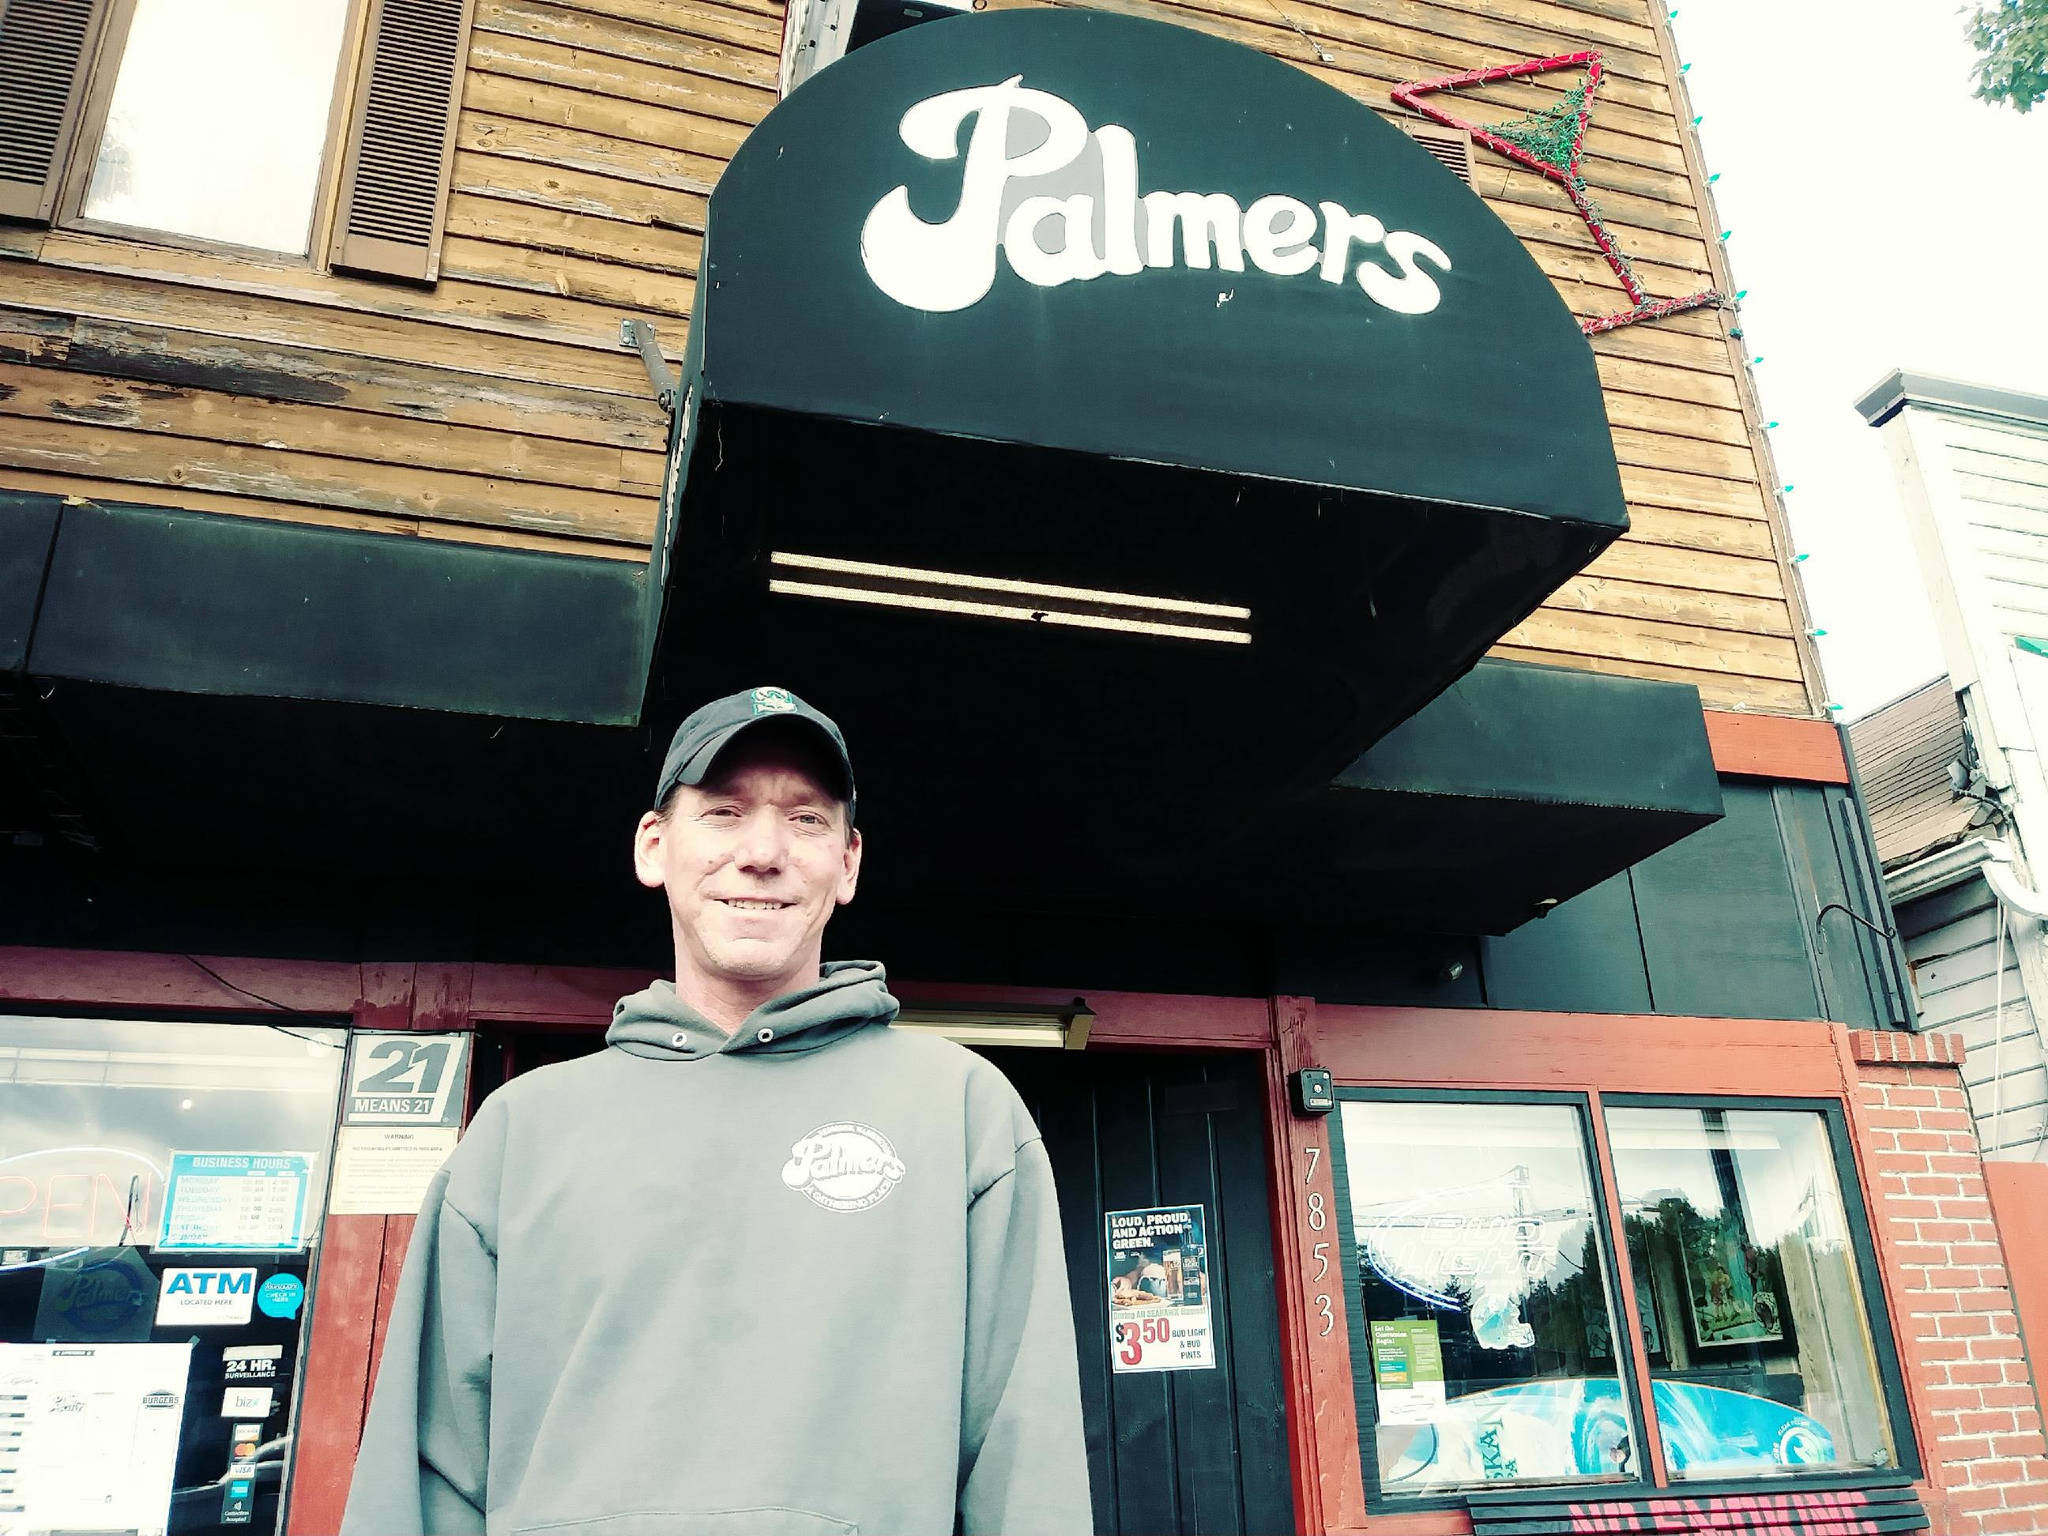 Thomas Wilhite, owner of Palmers East, stands in front of his bar on Wednesday morning. Aaron Kunkler/Redmond Reporter